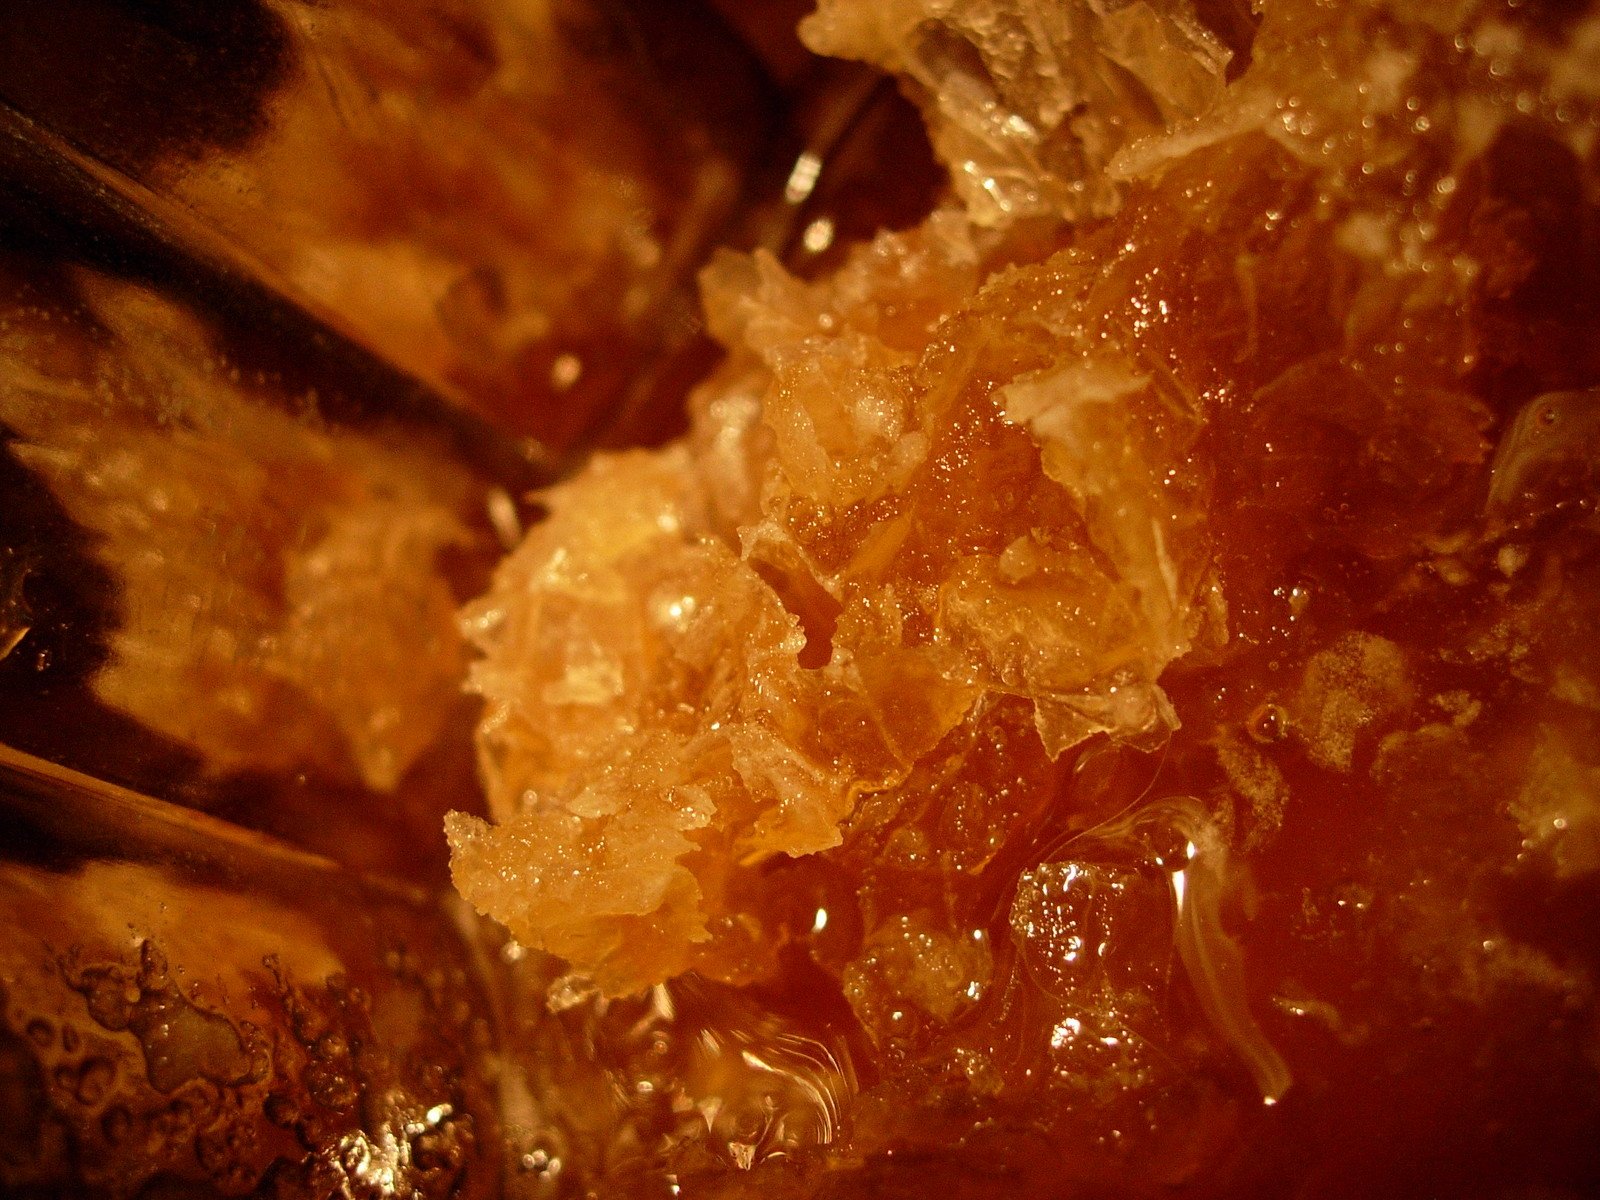 a close up po of the honey substance